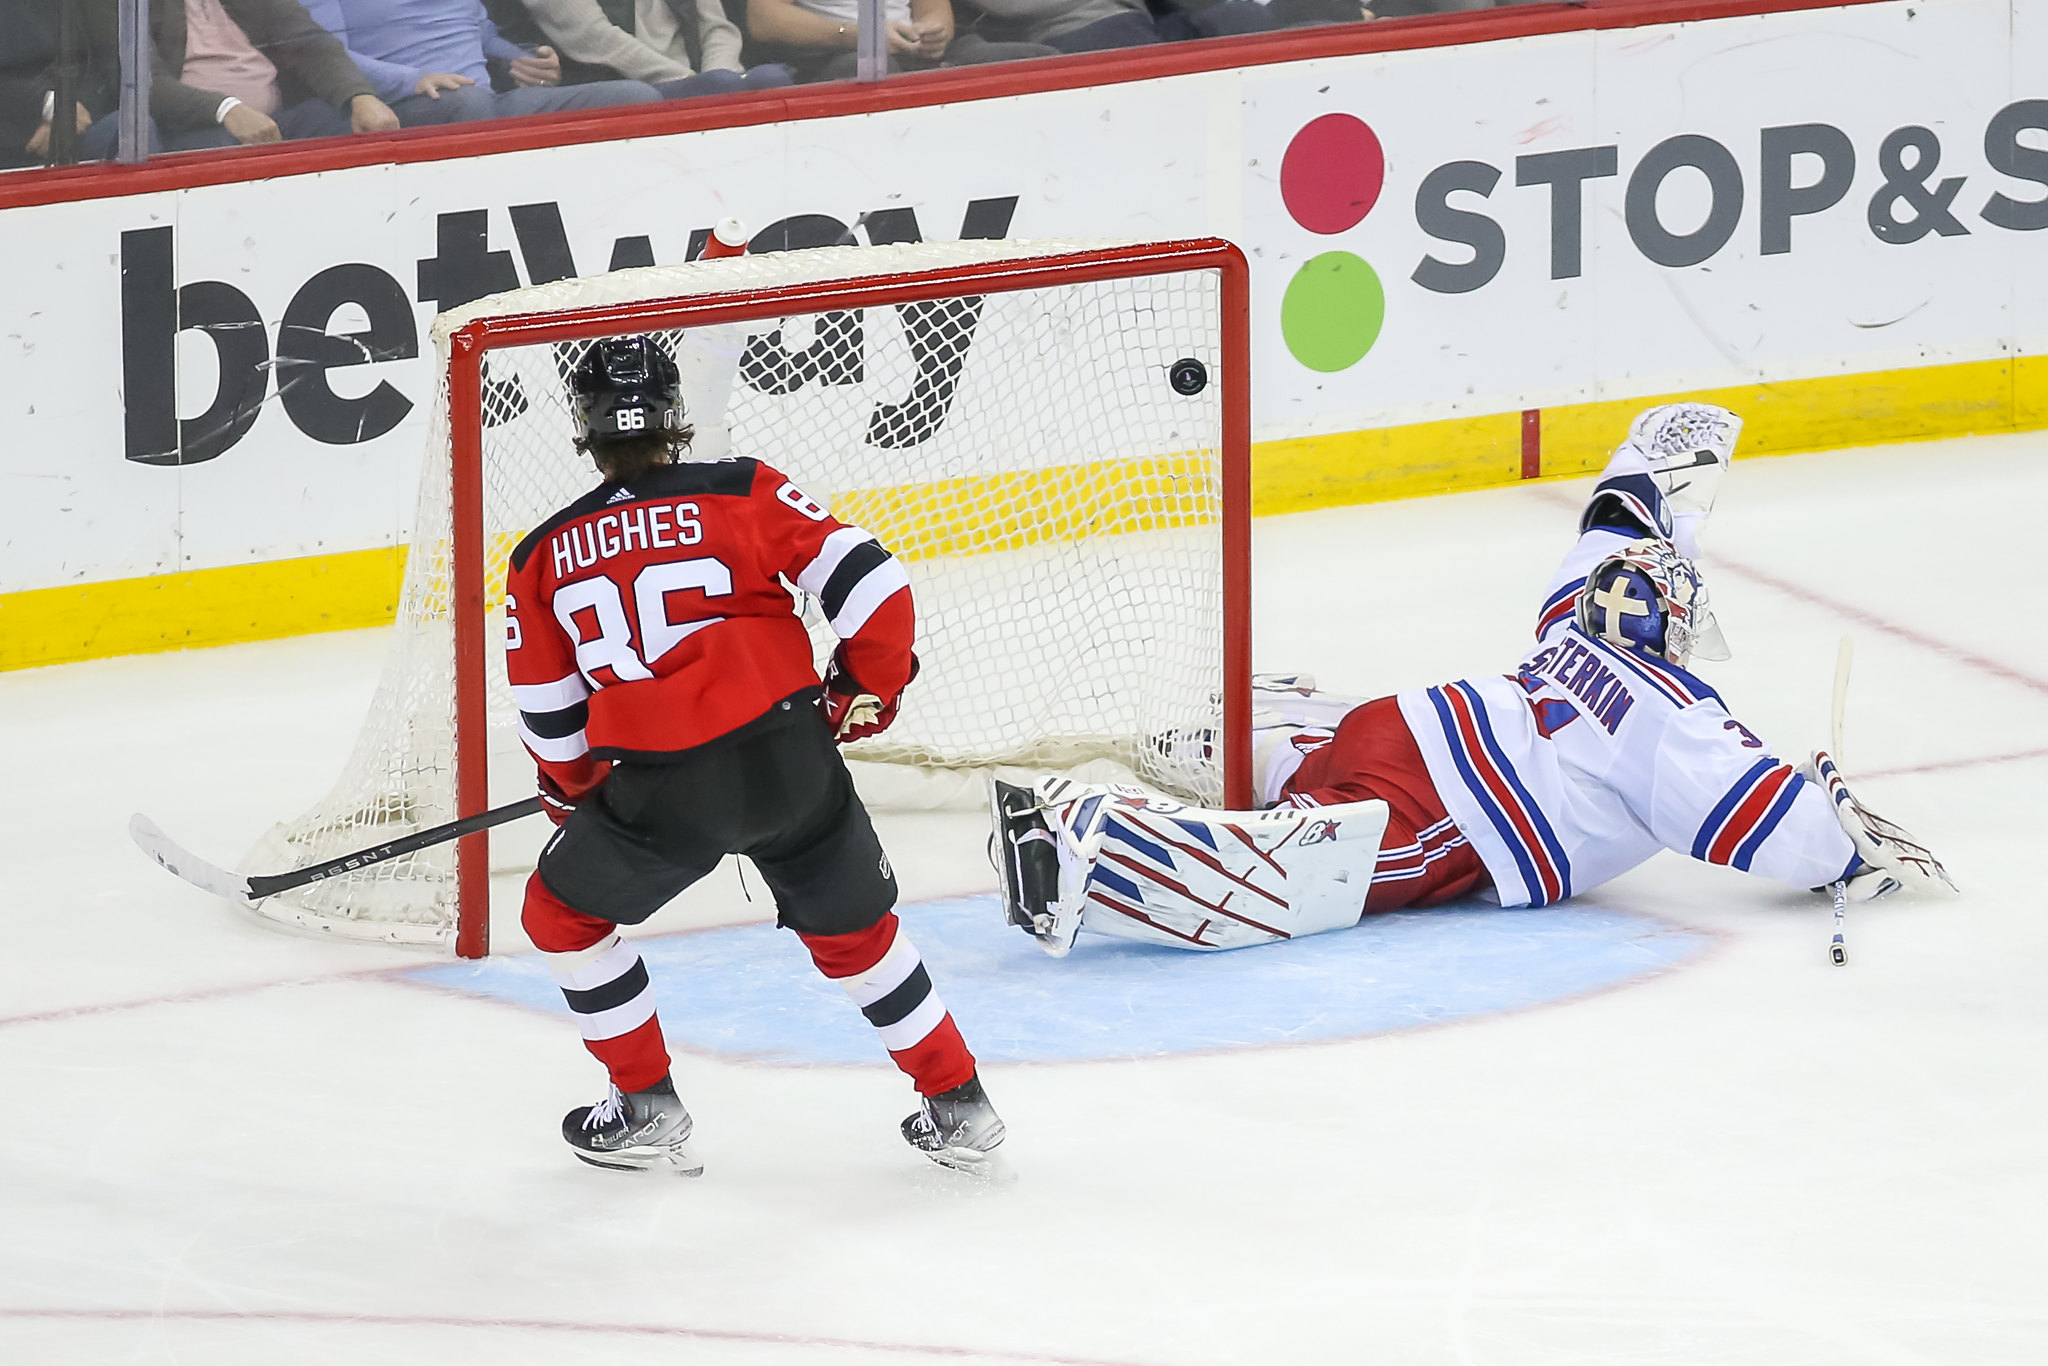 Rangers' penalty kill shuts down Devils' power play completely